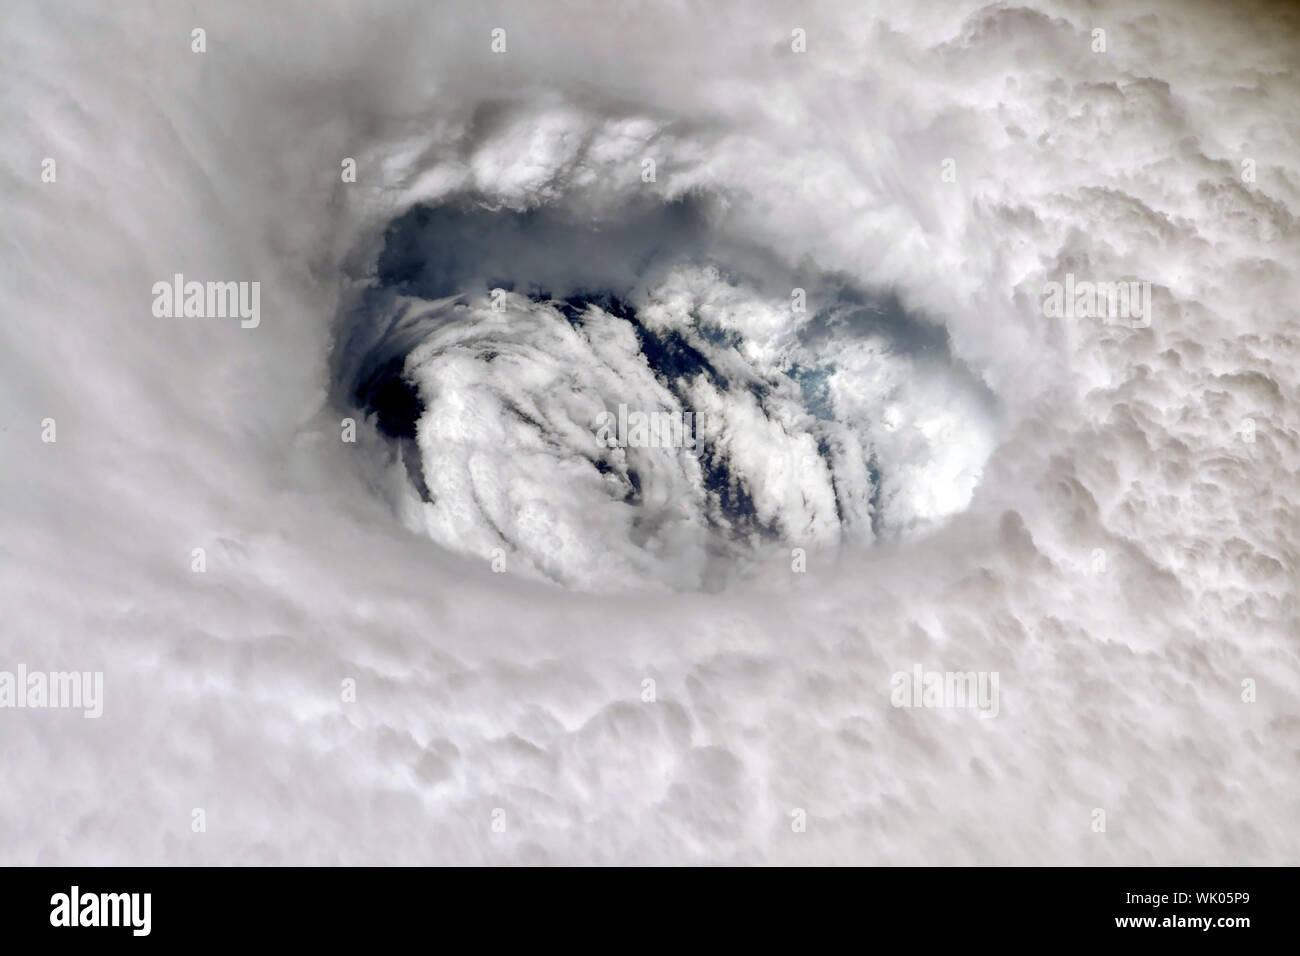 NASA International Space Station (ISS) view of the eye of Hurricane Dorian photographed by astronaut Nick Hague on September 2, 2019. Stock Photo